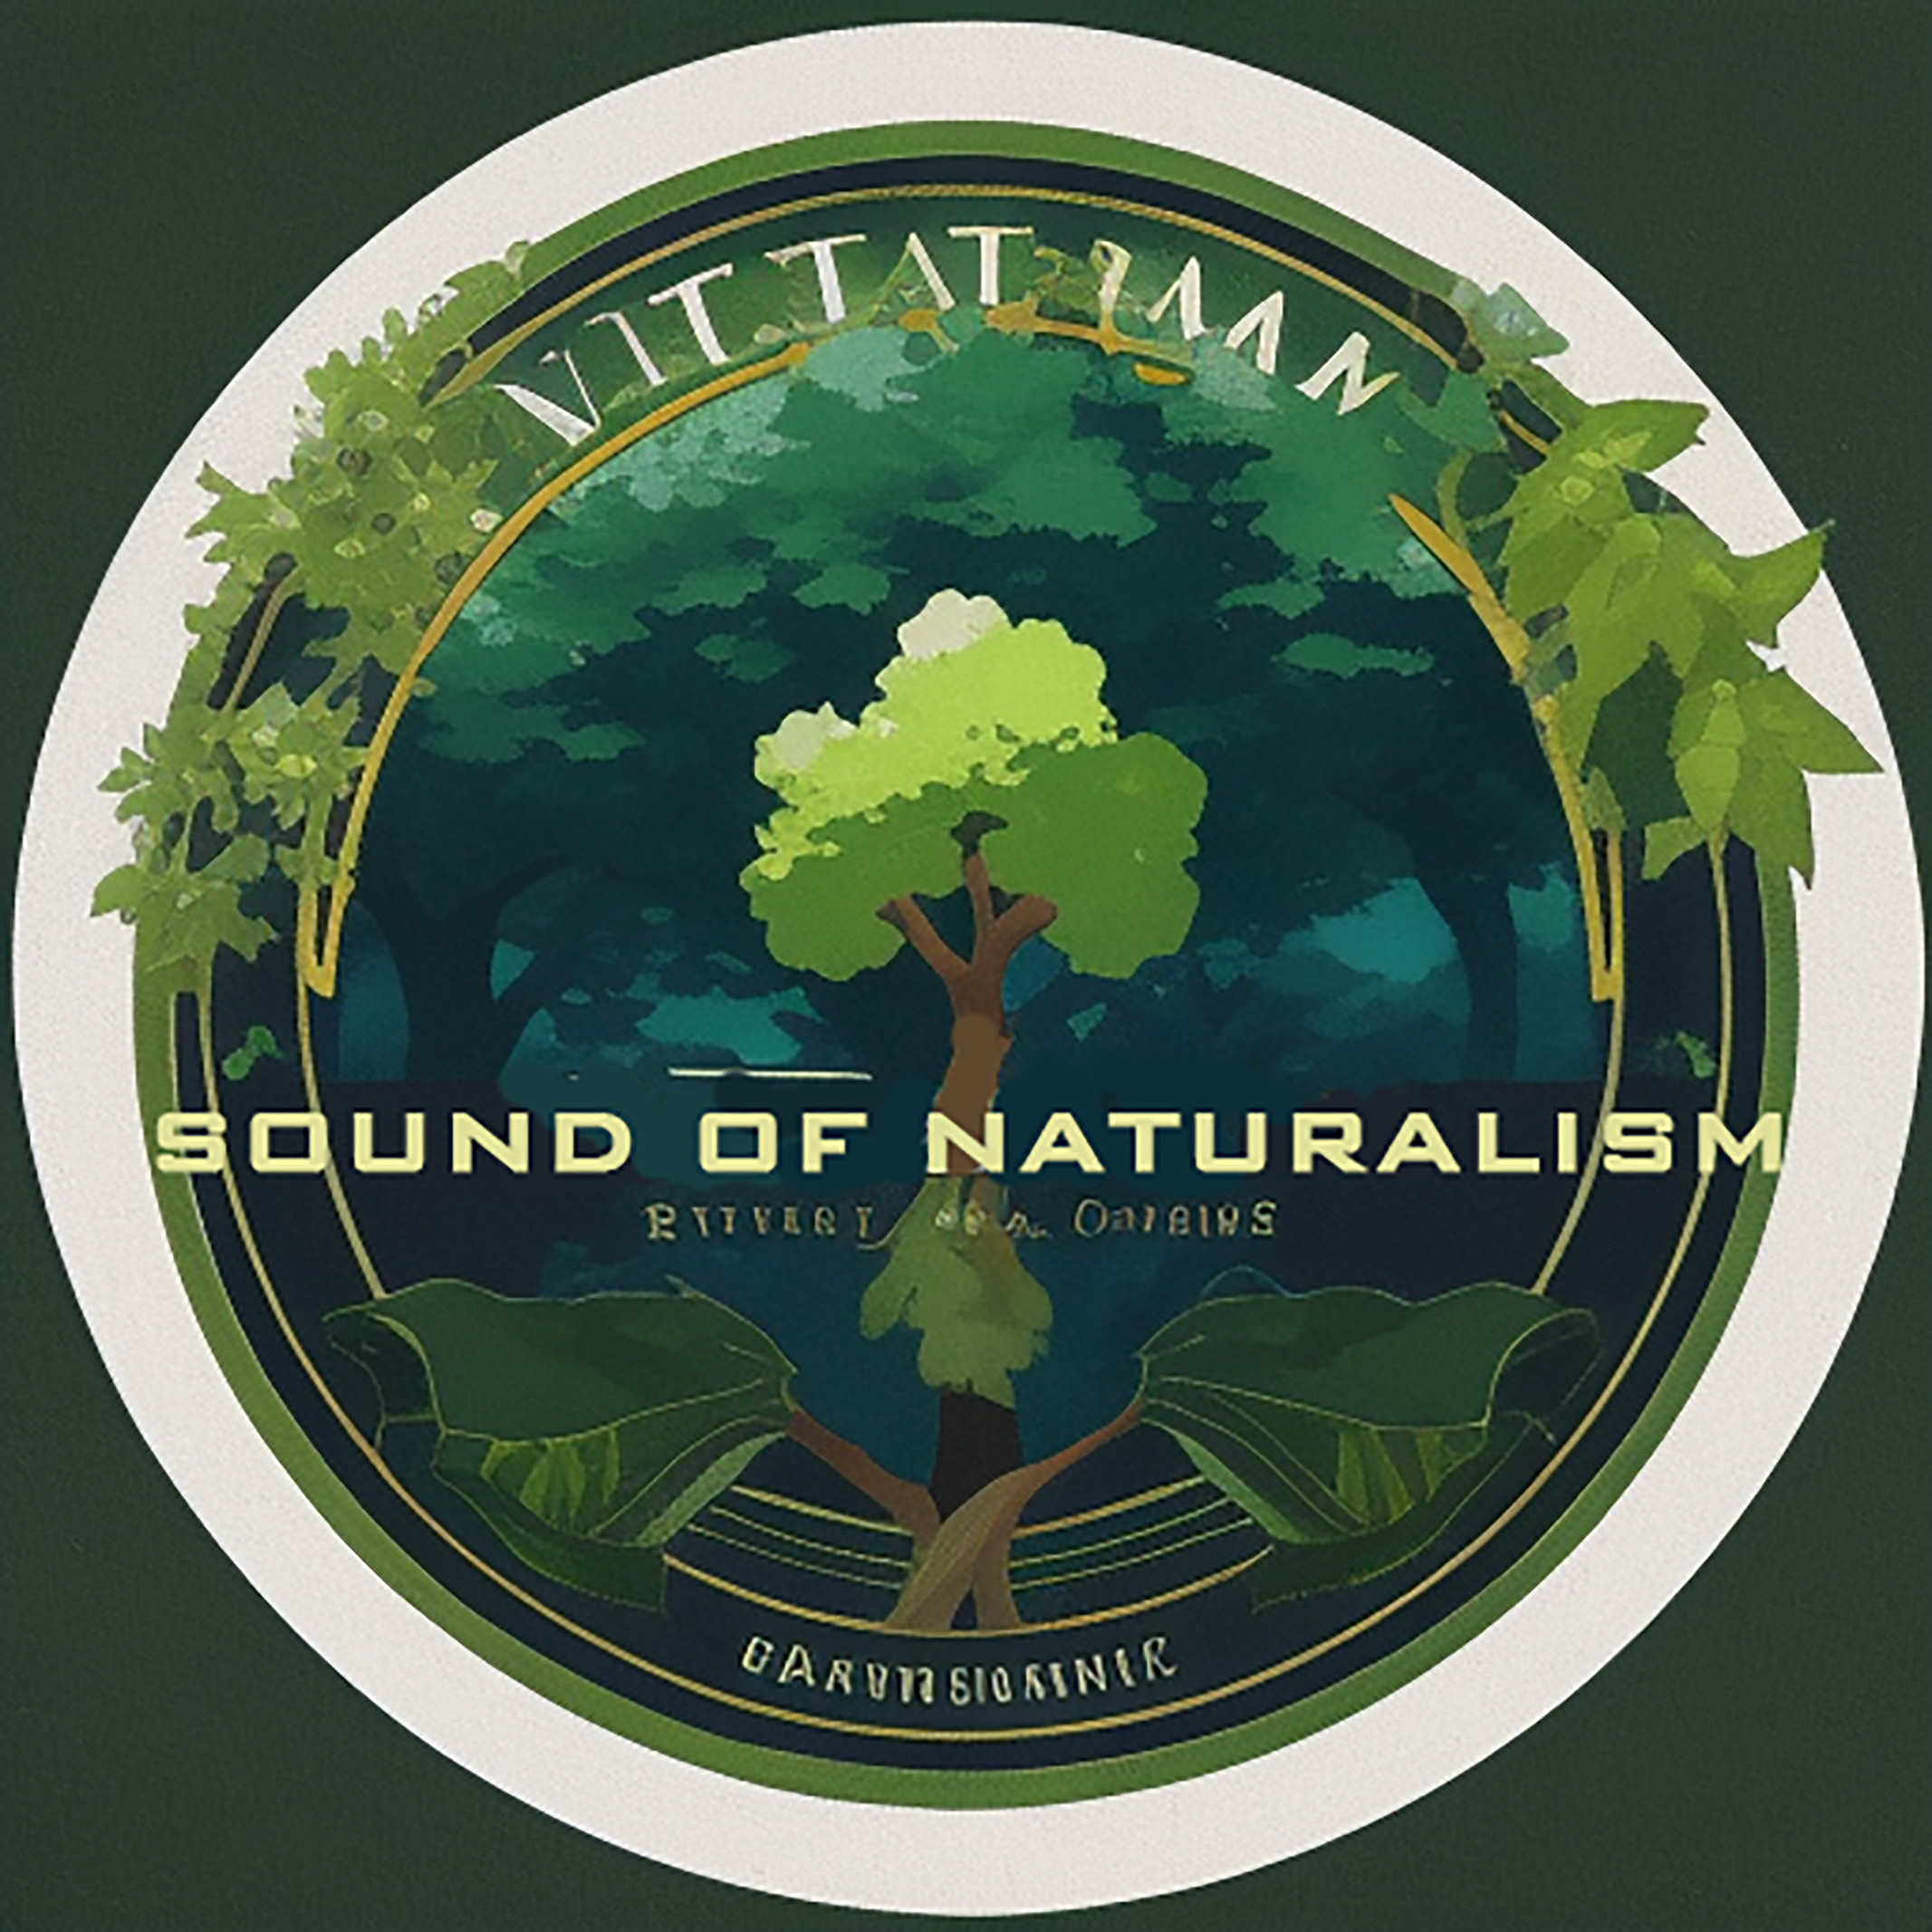 Sound of the Naturalism